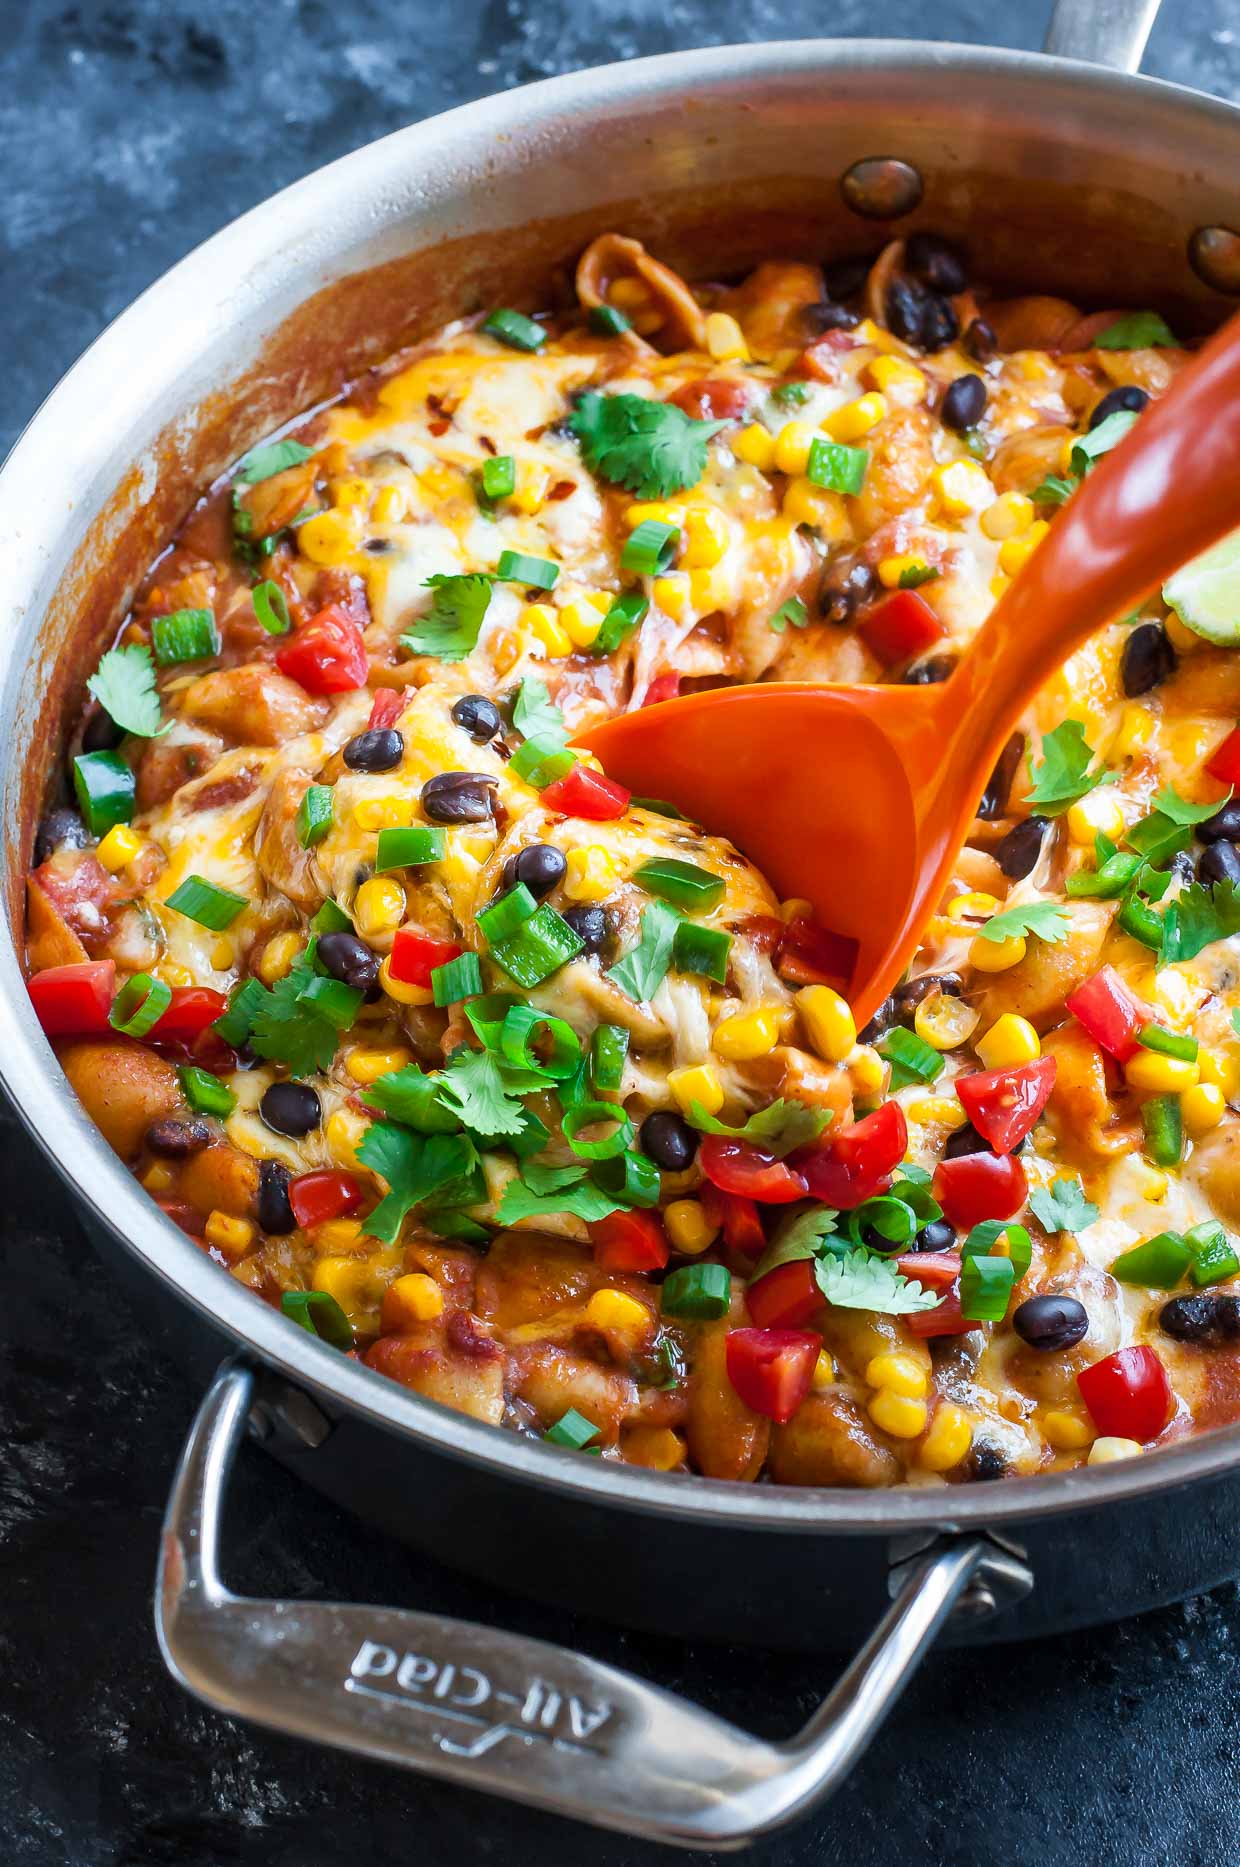 18 Vegetarian One-Pot Pasta Recipes for Busy Weeknights: Healthy One-Pot Enchilada Pasta Bake